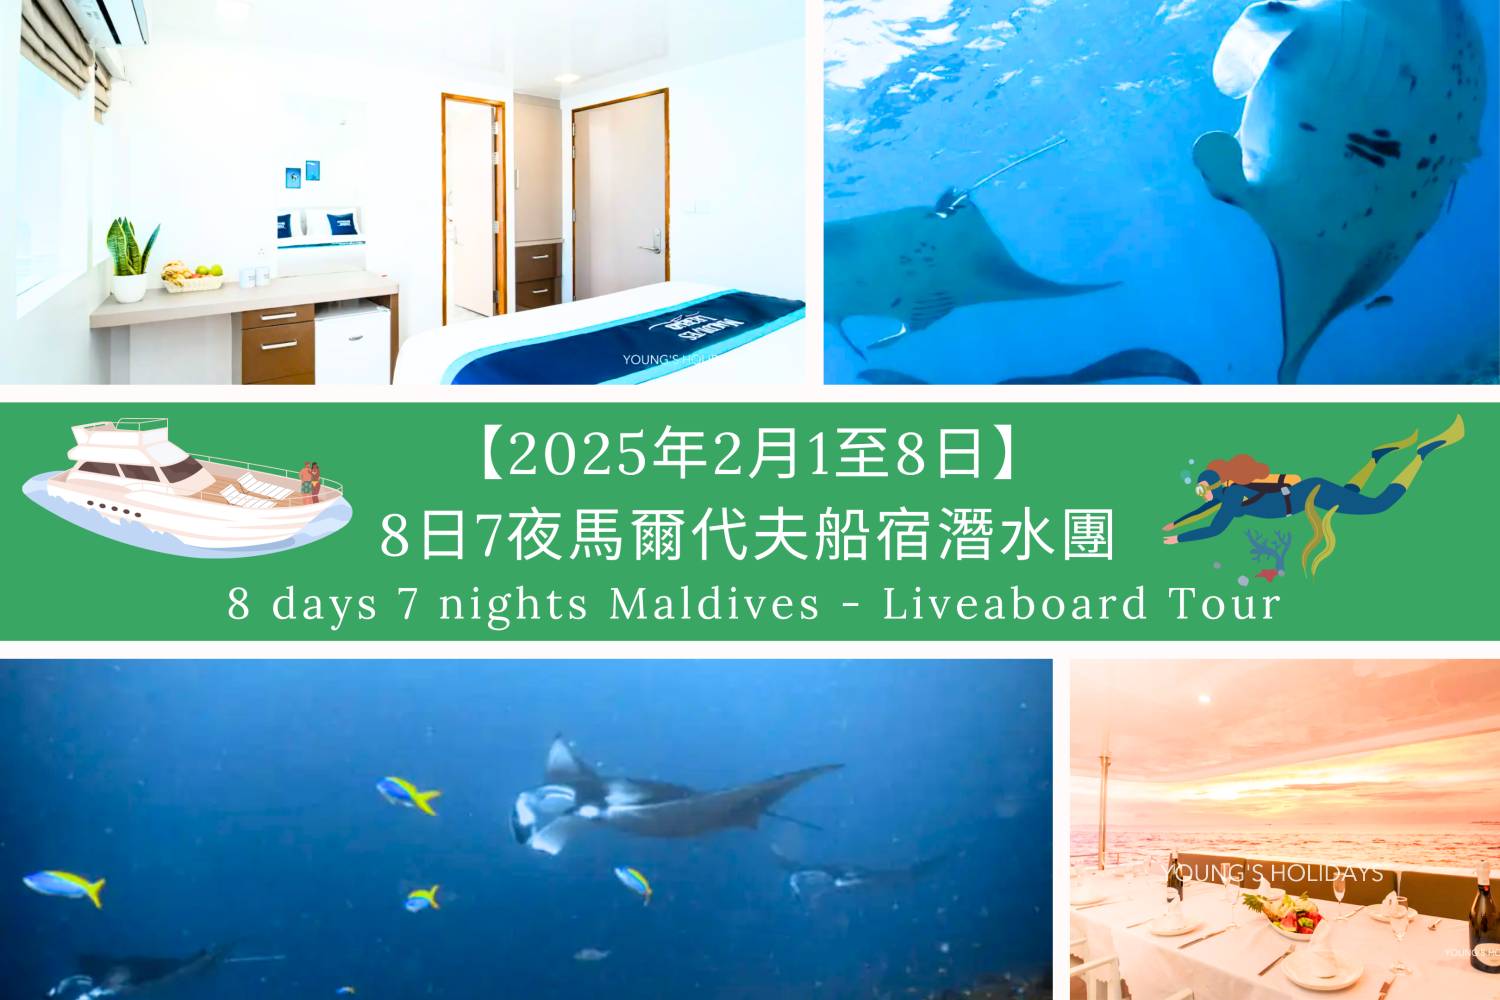 【Maldives】CNY 8 Days 7 Nights(February 1-8, 2025) Maldives - Liveaboard Tour ( travel with instructor Berry )